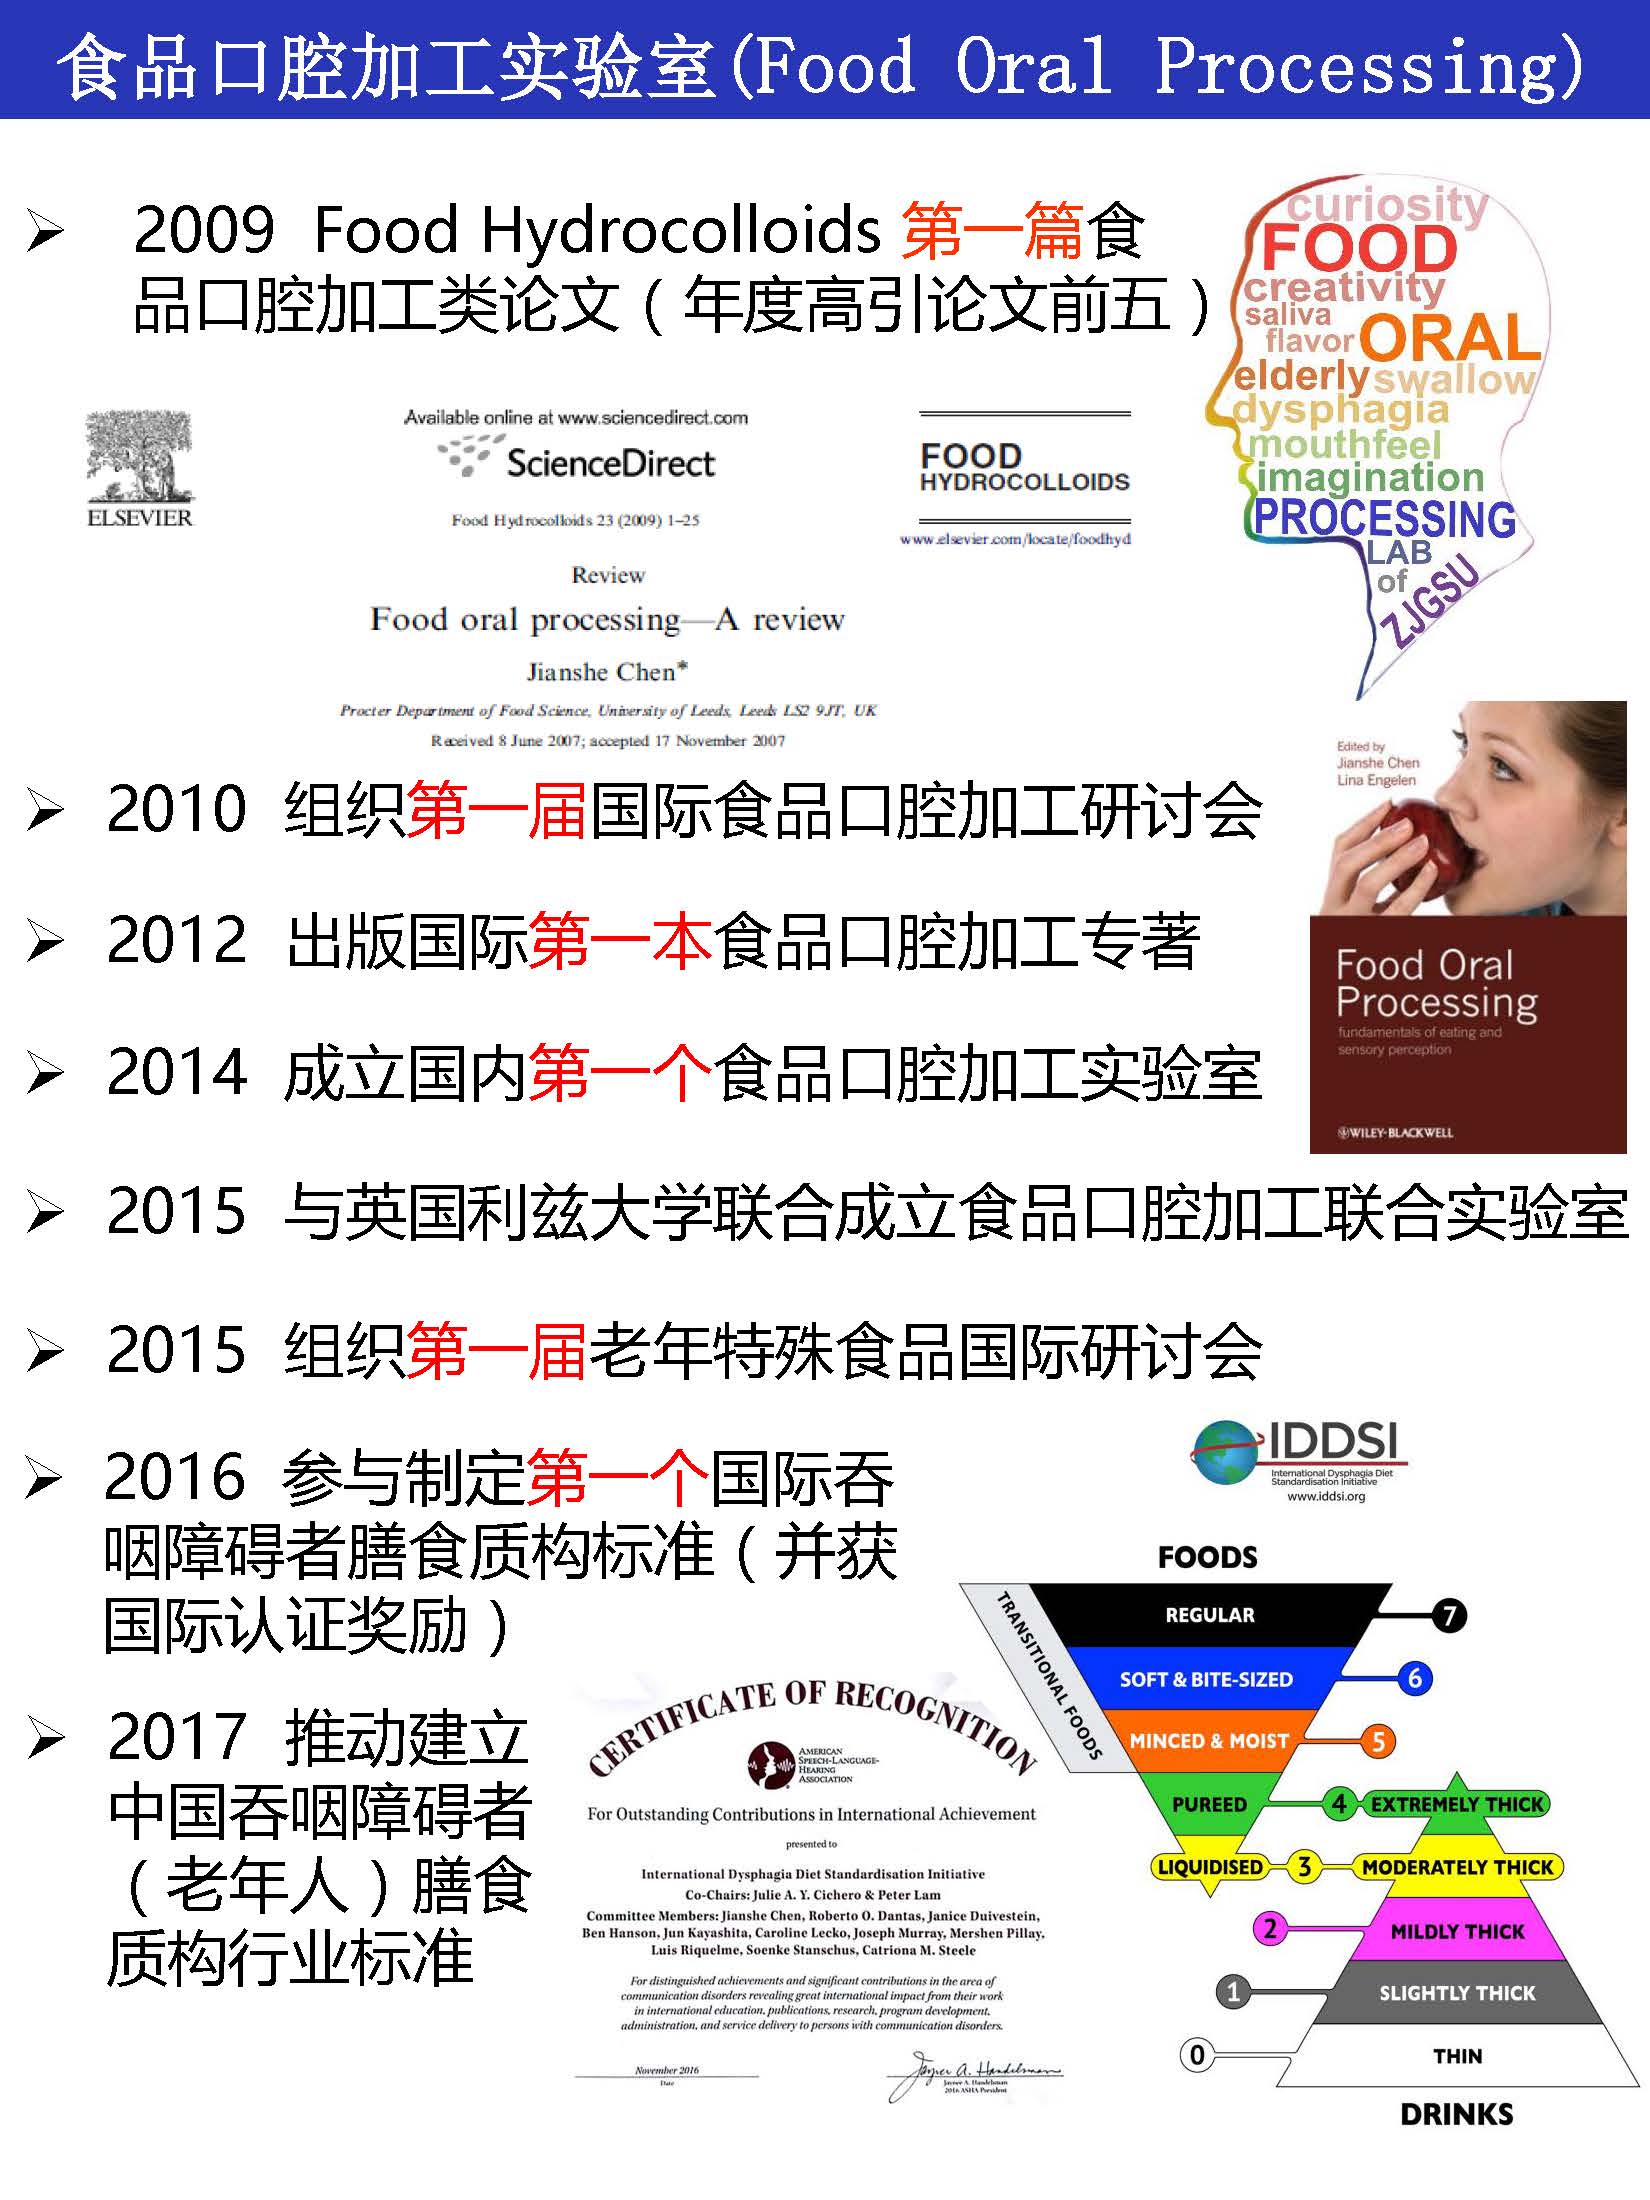 Food Oral Processing Lab Poster Xinmiao Aug 9, 2017_Page_1.jpg